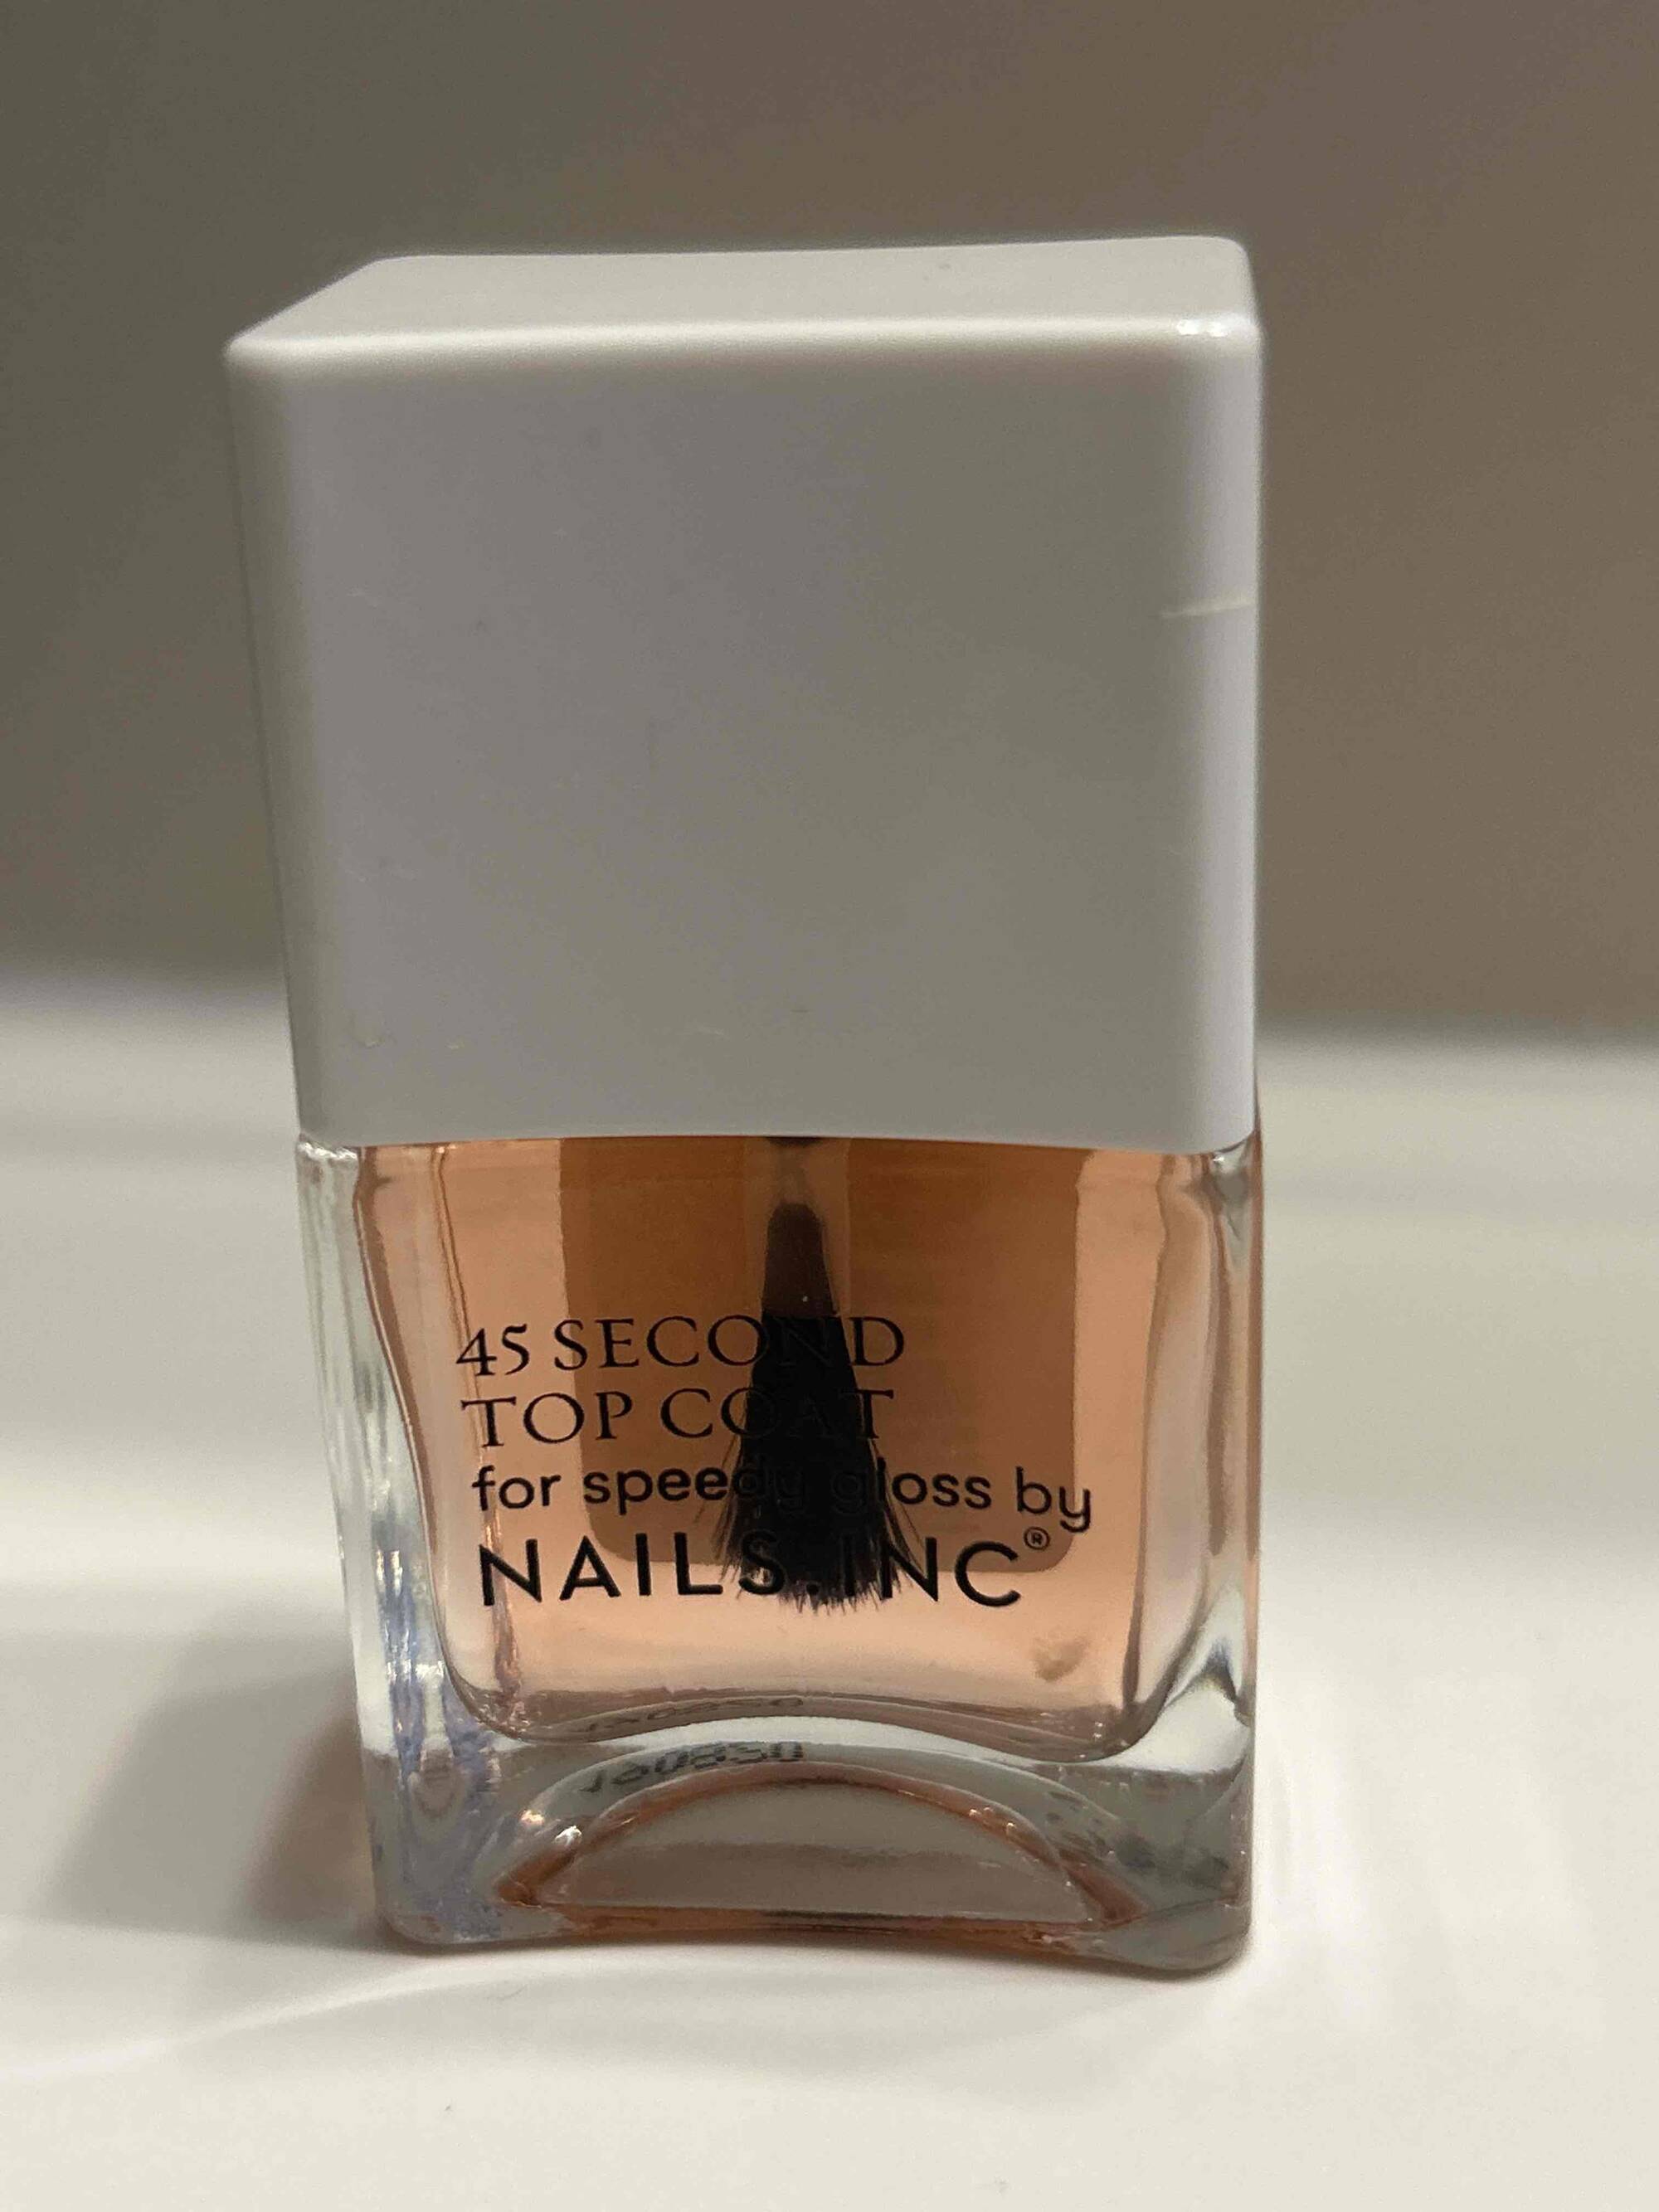 NAILS INC. - 45 second - Top Coat for speedy gloss